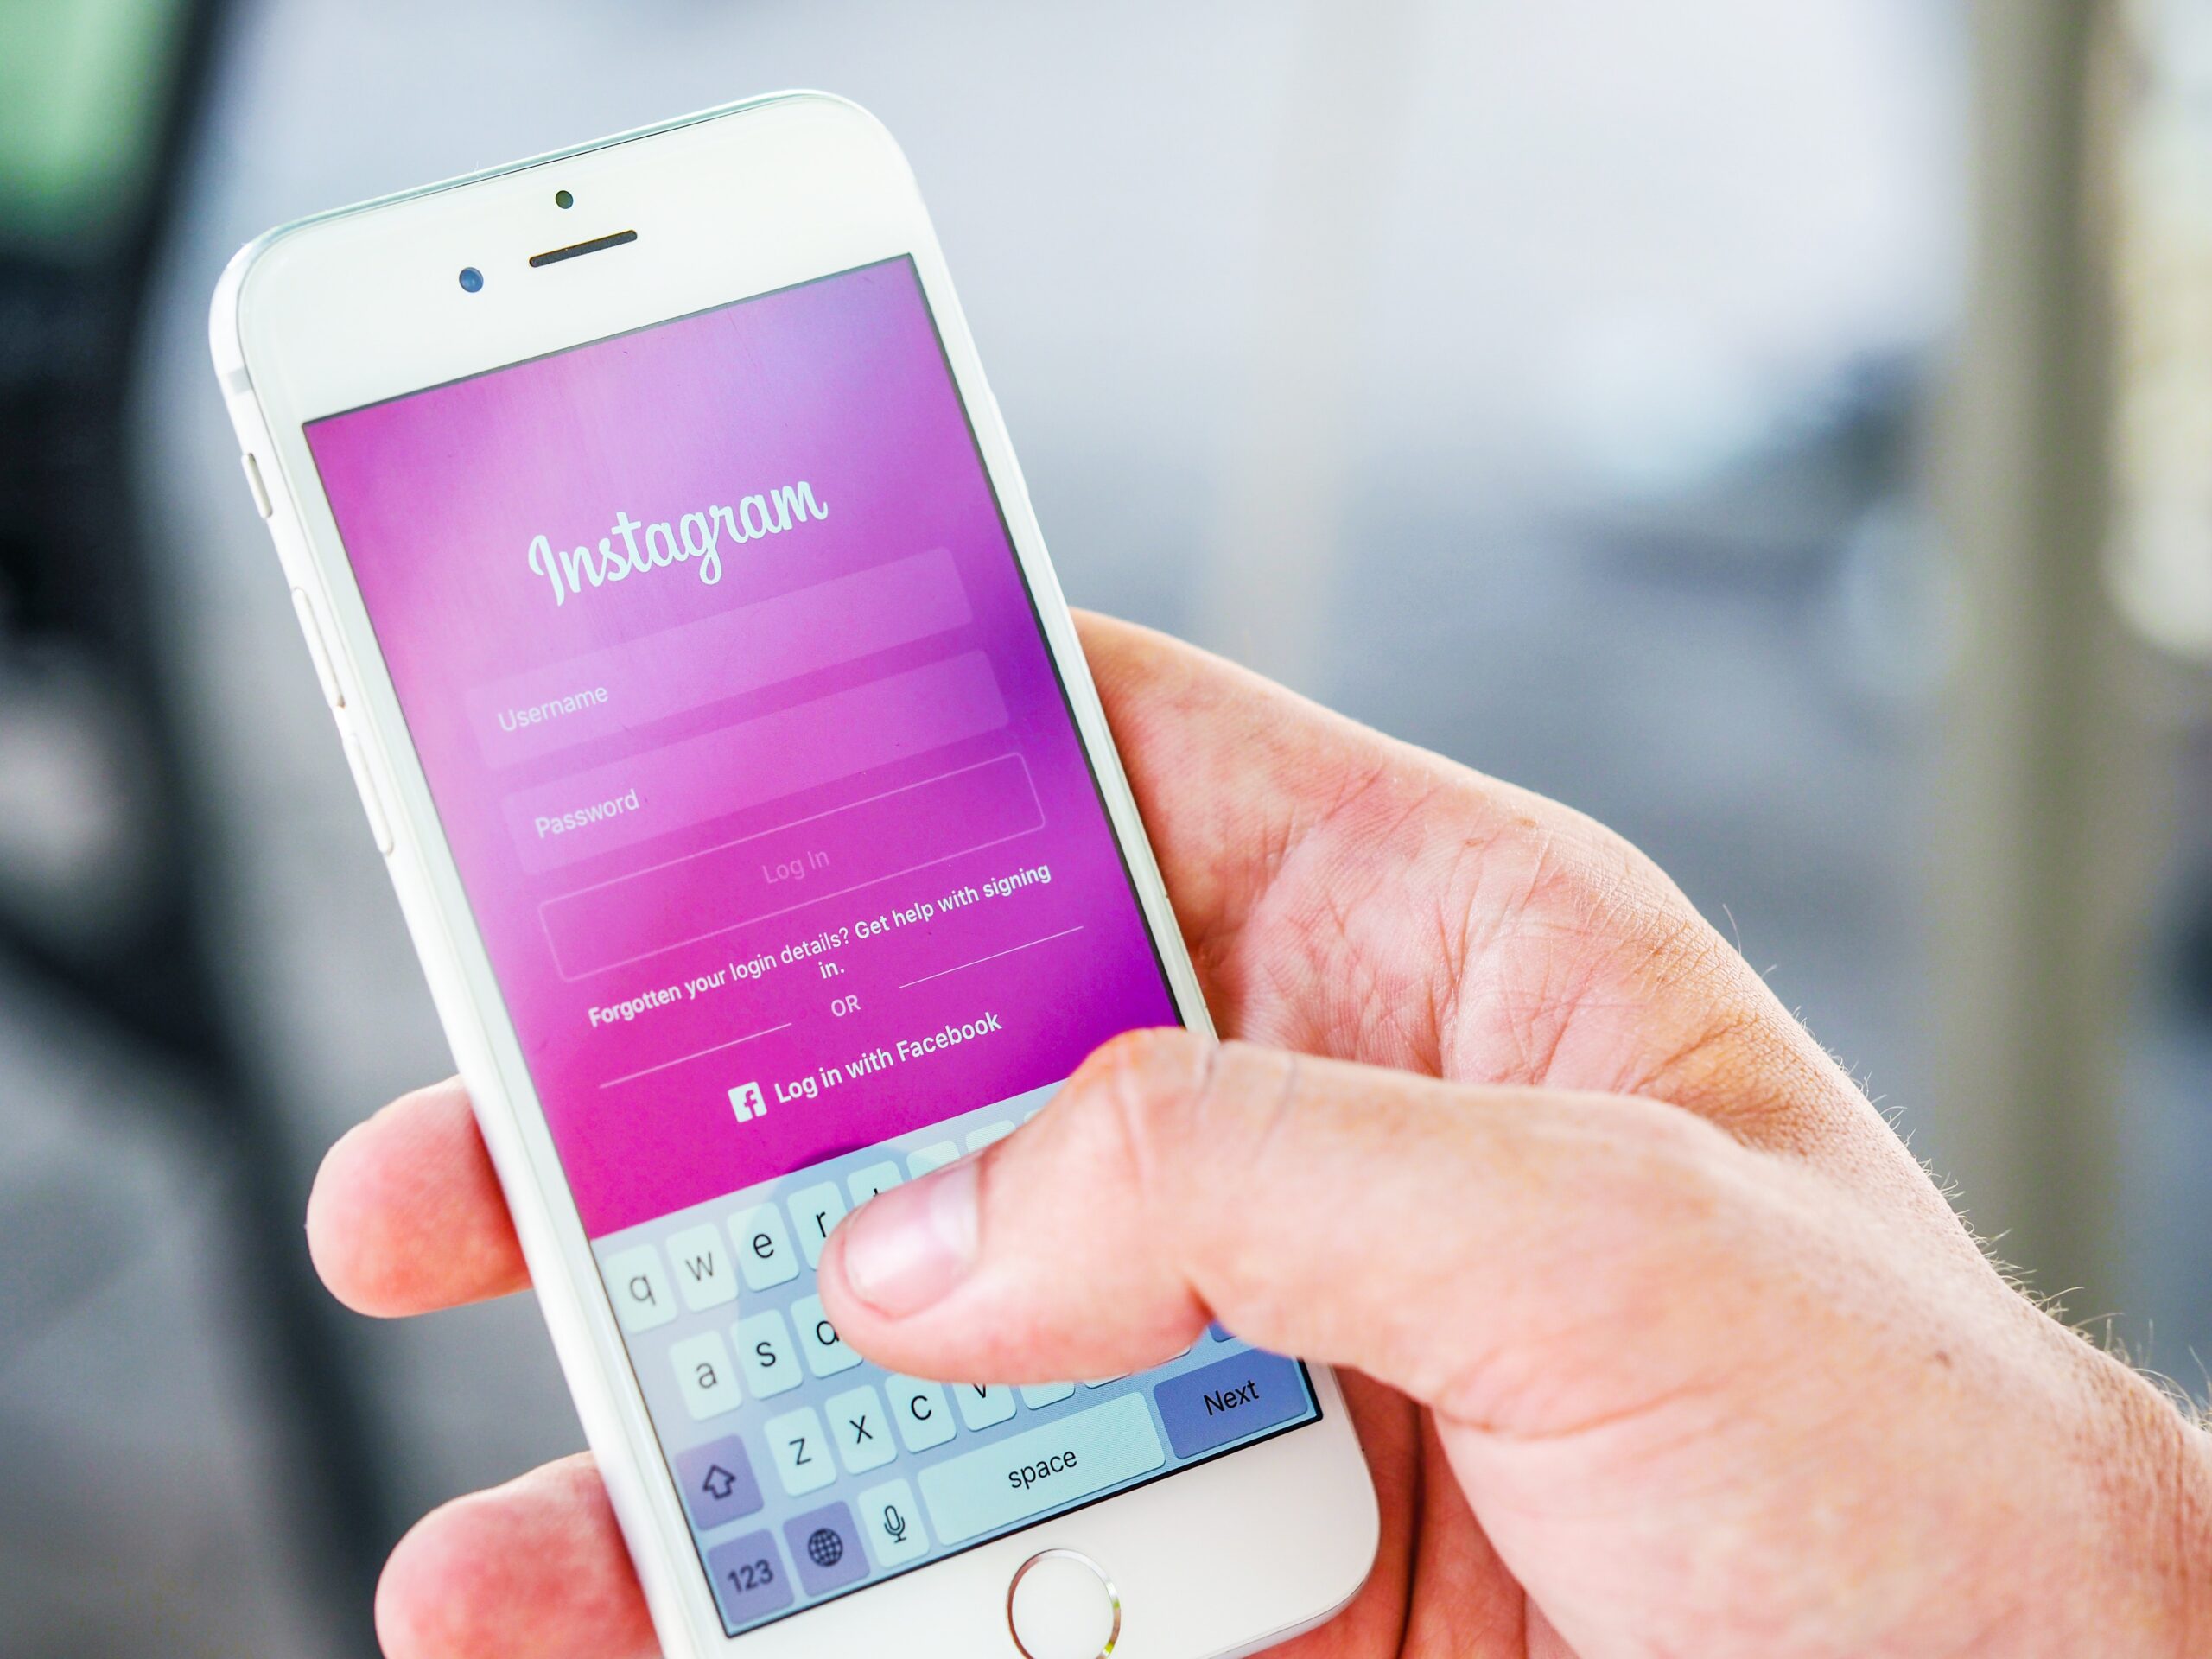 Fashion Blogging on Instagram: Proven Strategies to Attract Your First Followers